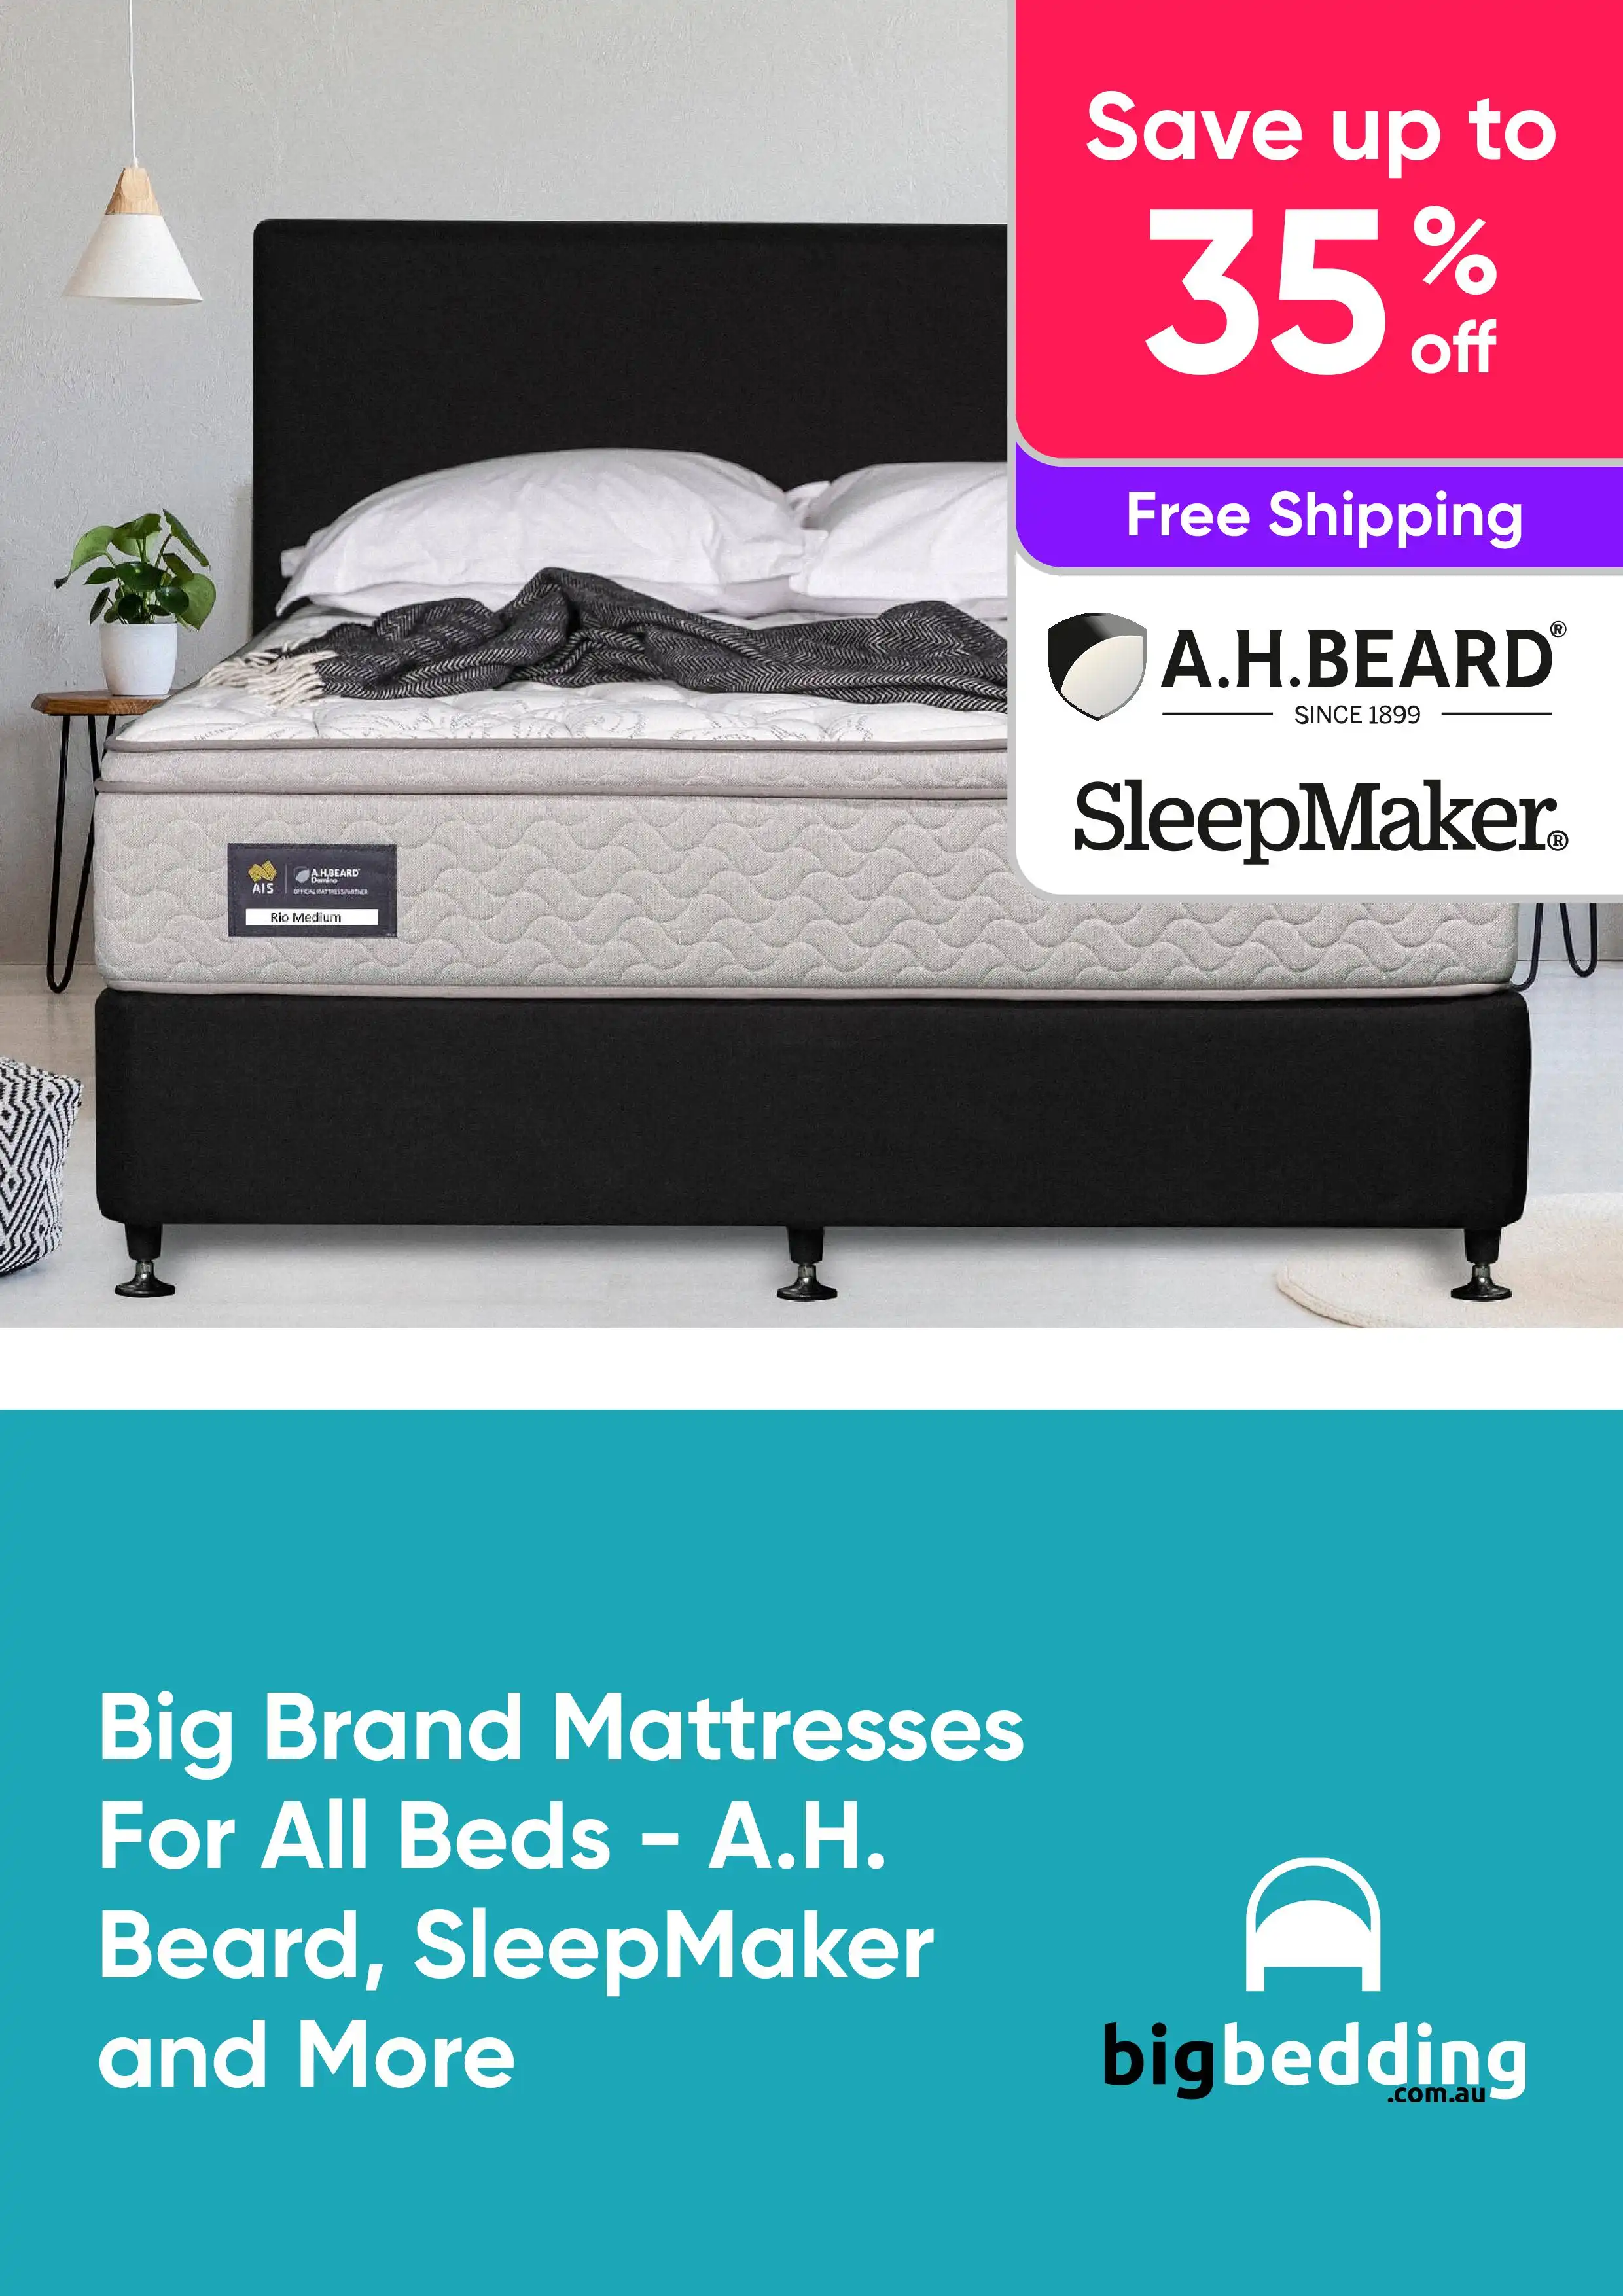 Save up to 35% on Big Brand Mattresses For All Beds - Shop A.H. Beard, SleepMaker